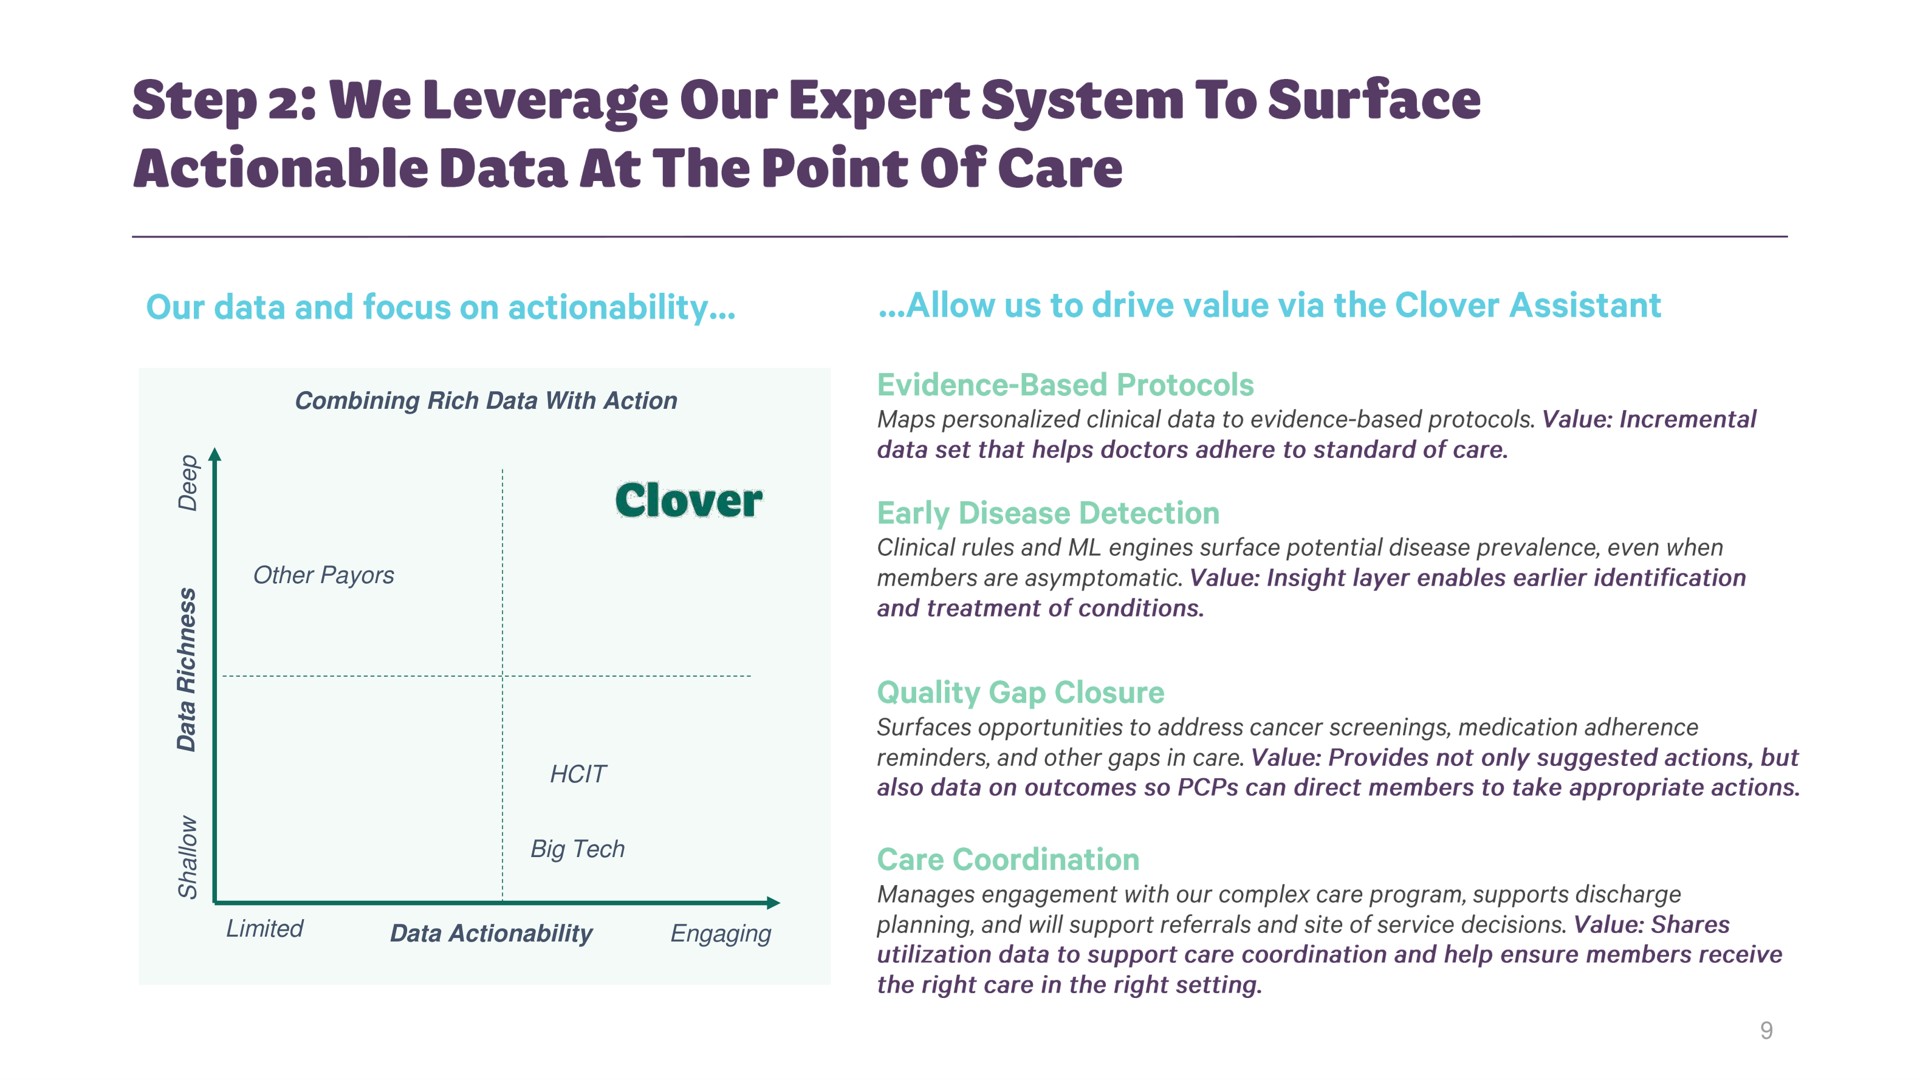 combining rich data with action other big tech limited data engaging actionable at the point of care | Clover Health